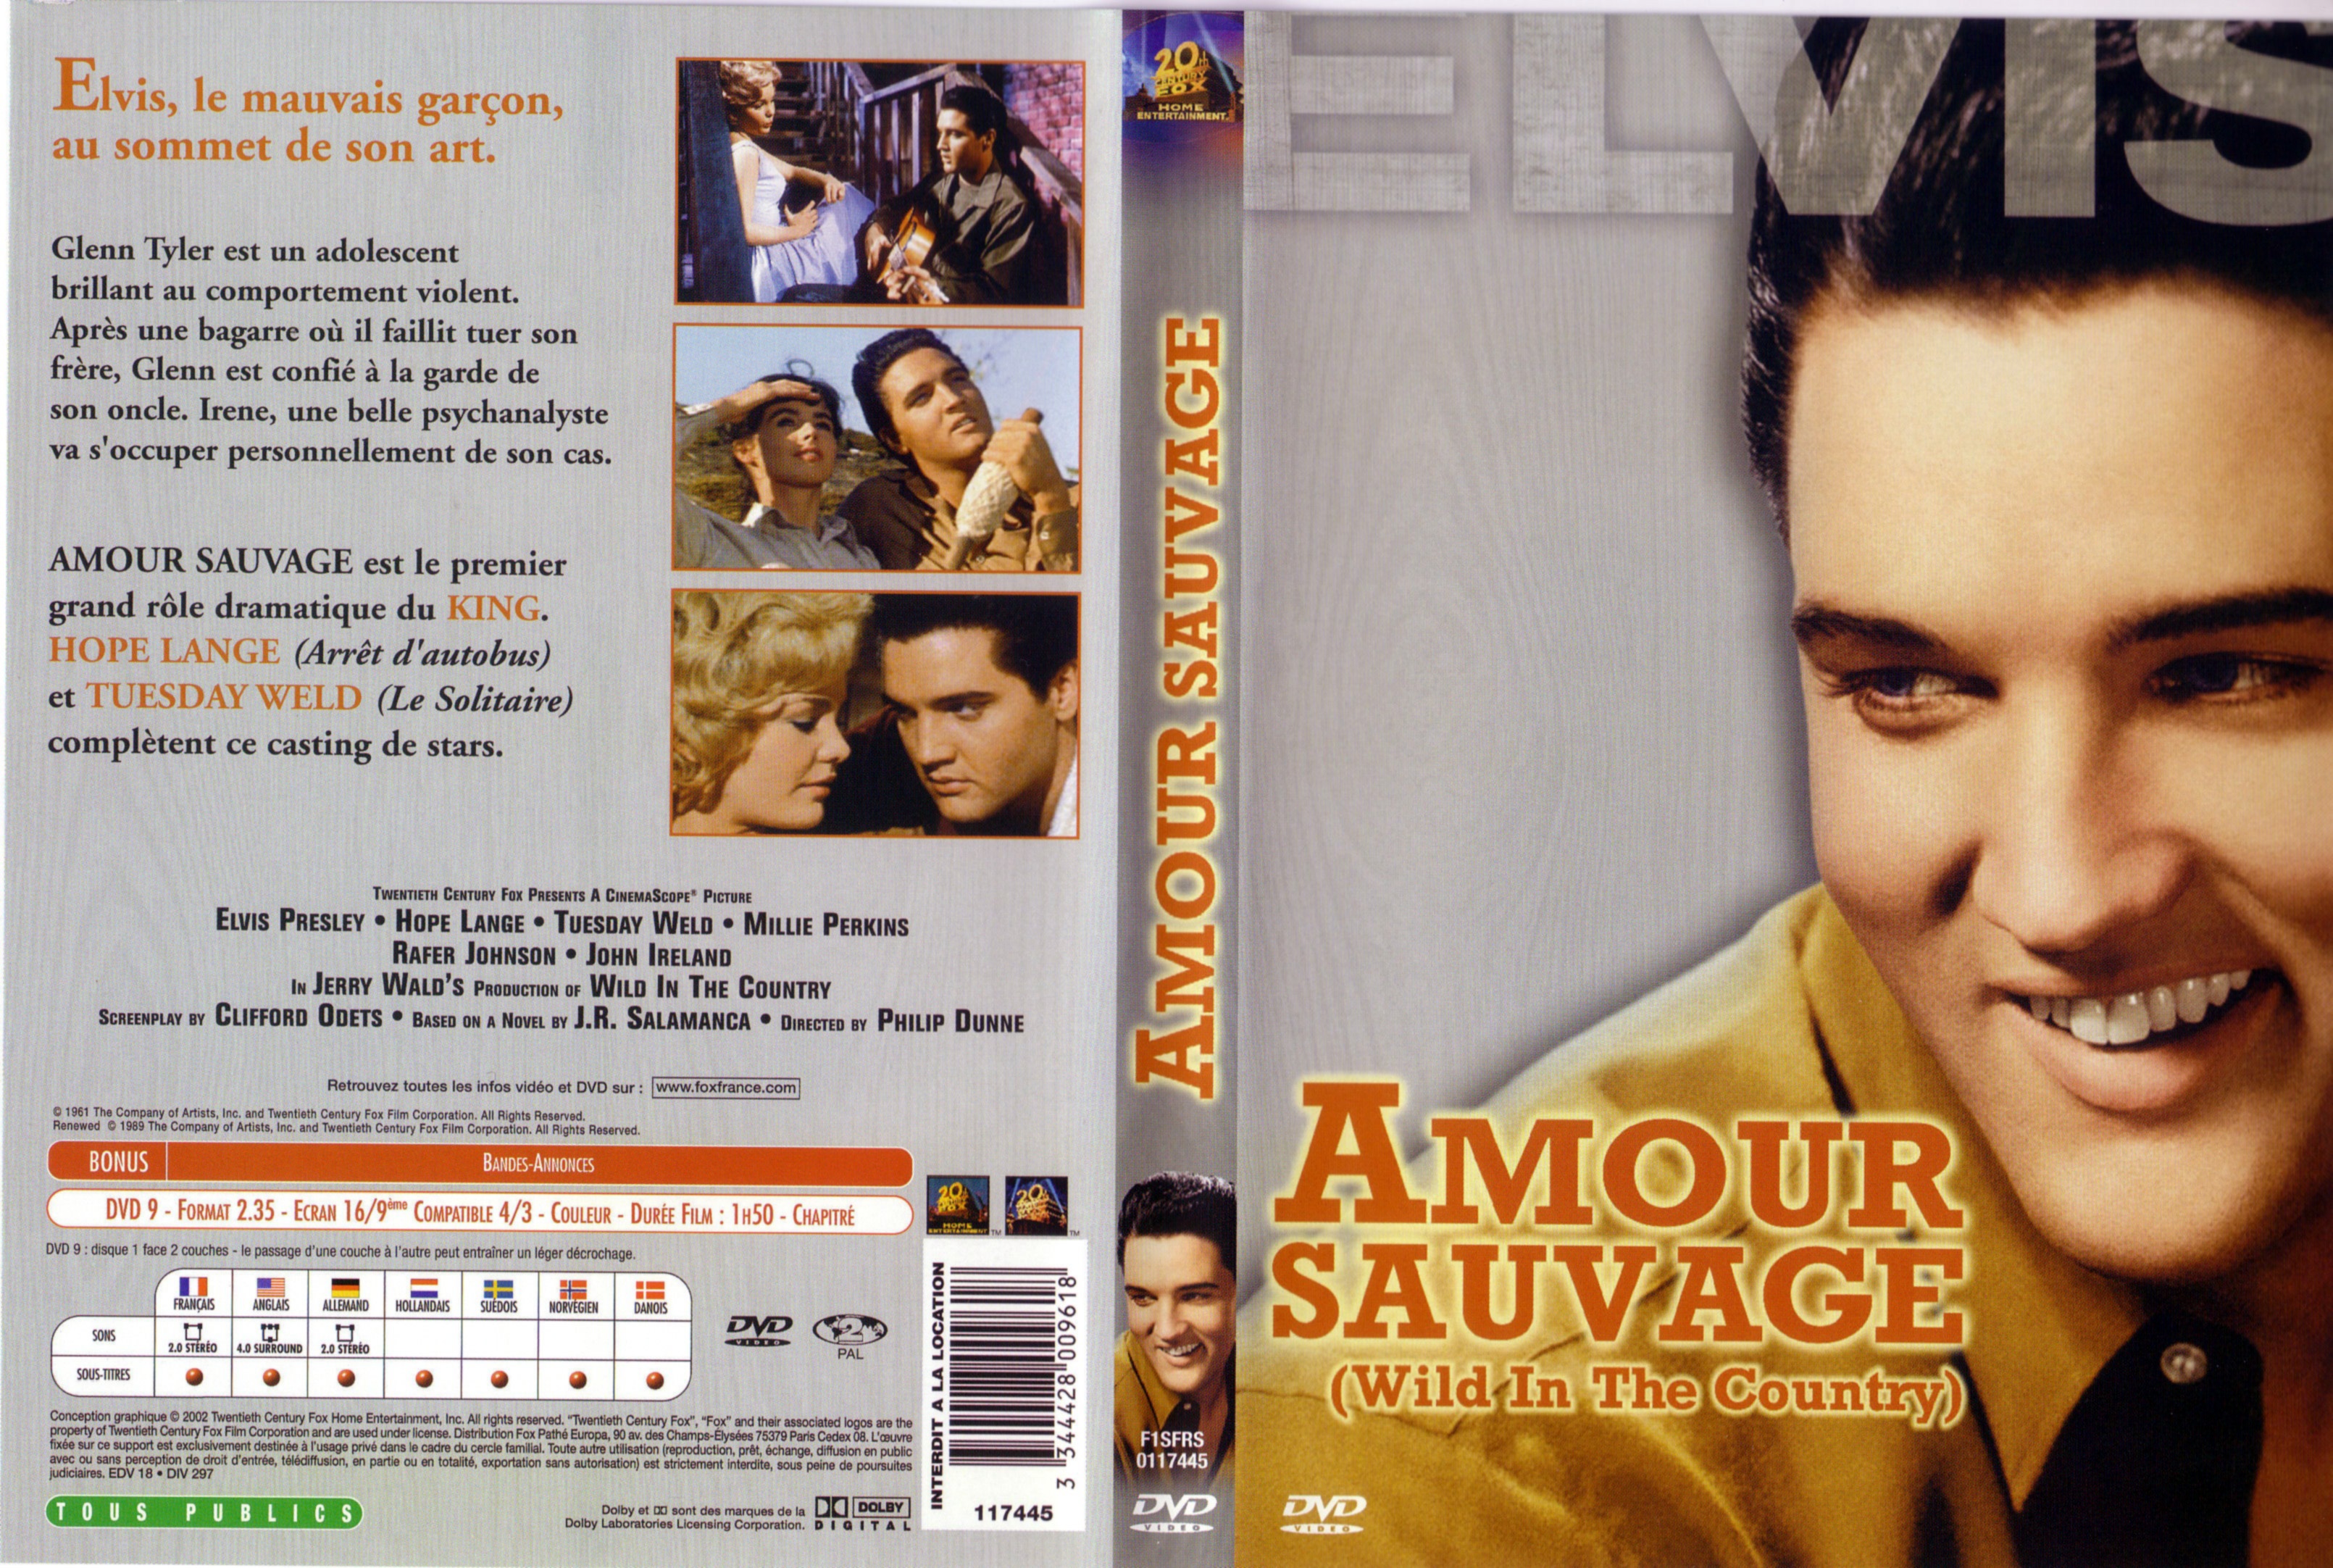 Jaquette DVD Amour sauvage